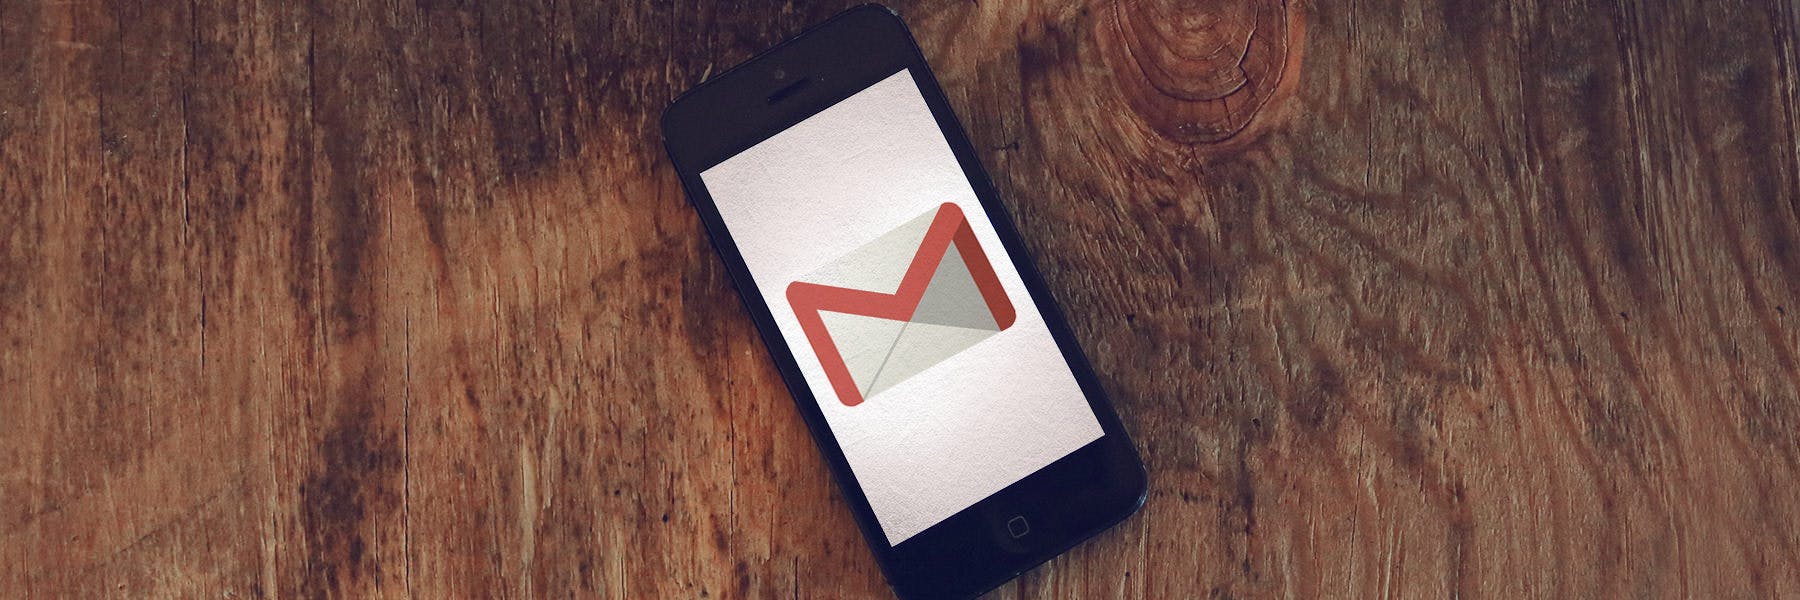 Add A Custom Email Address Into A Free Gmail Account